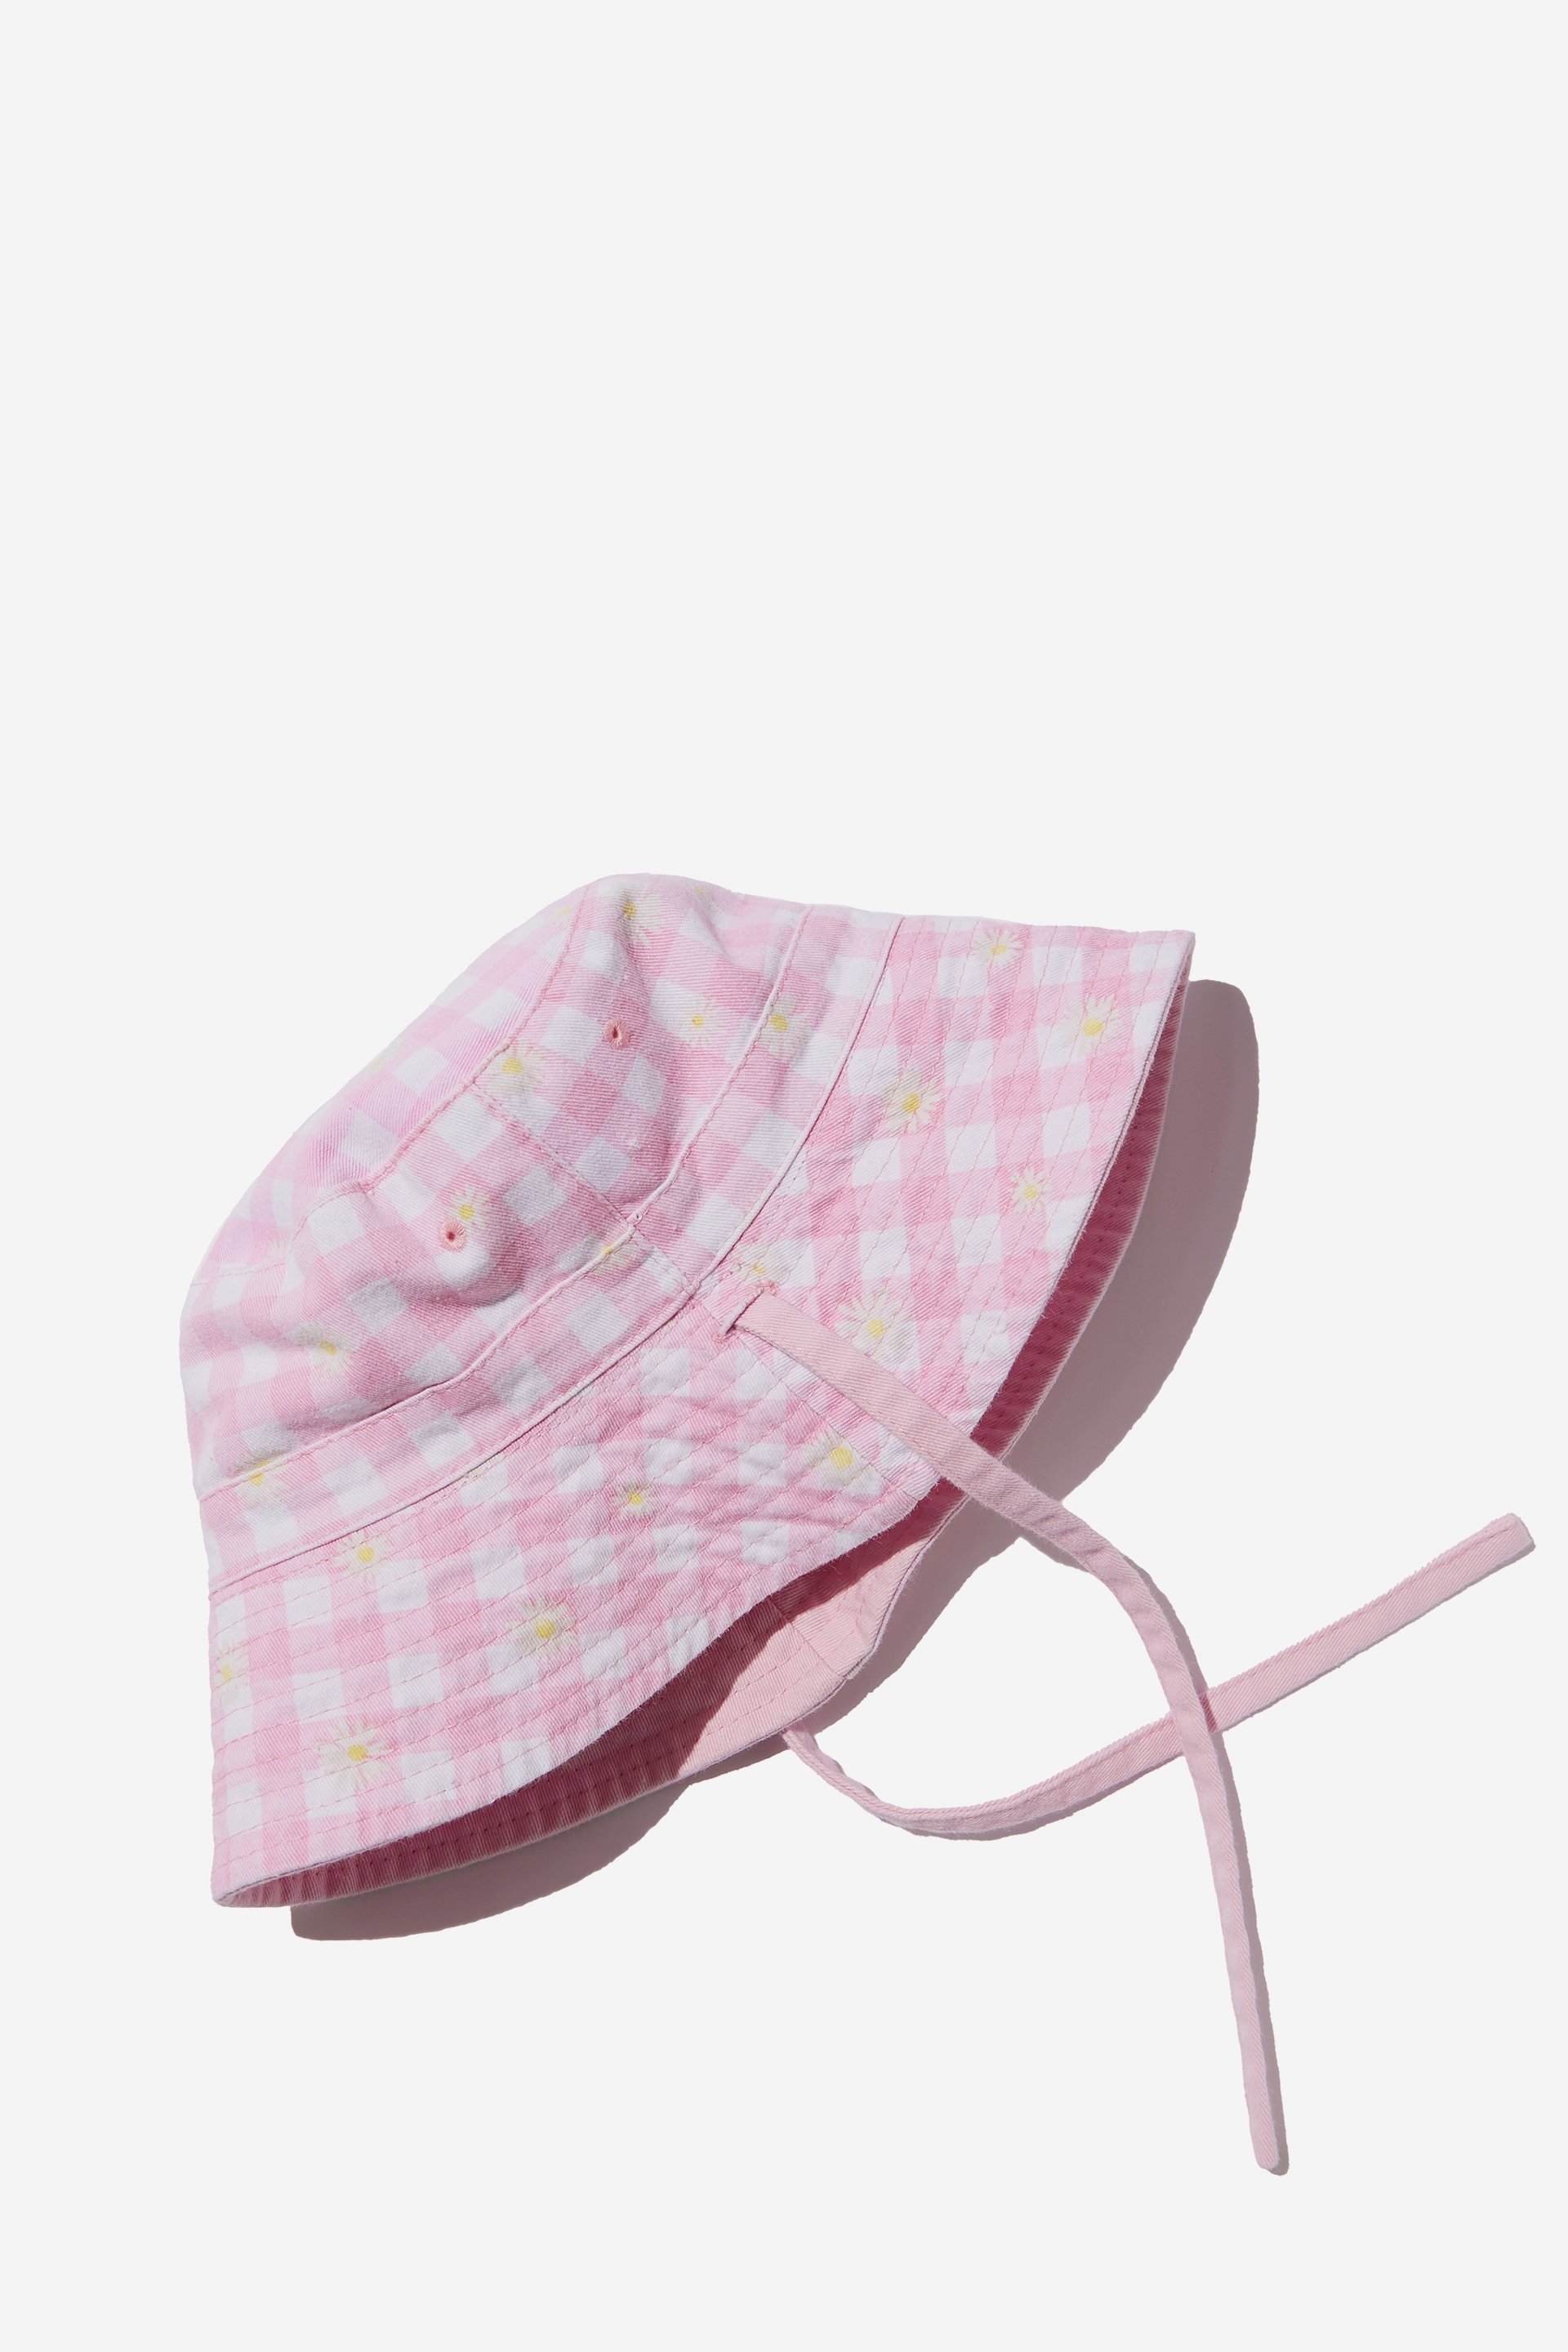 Cotton On Kids - Reversible Bucket Hat - Pink gingham/daisy